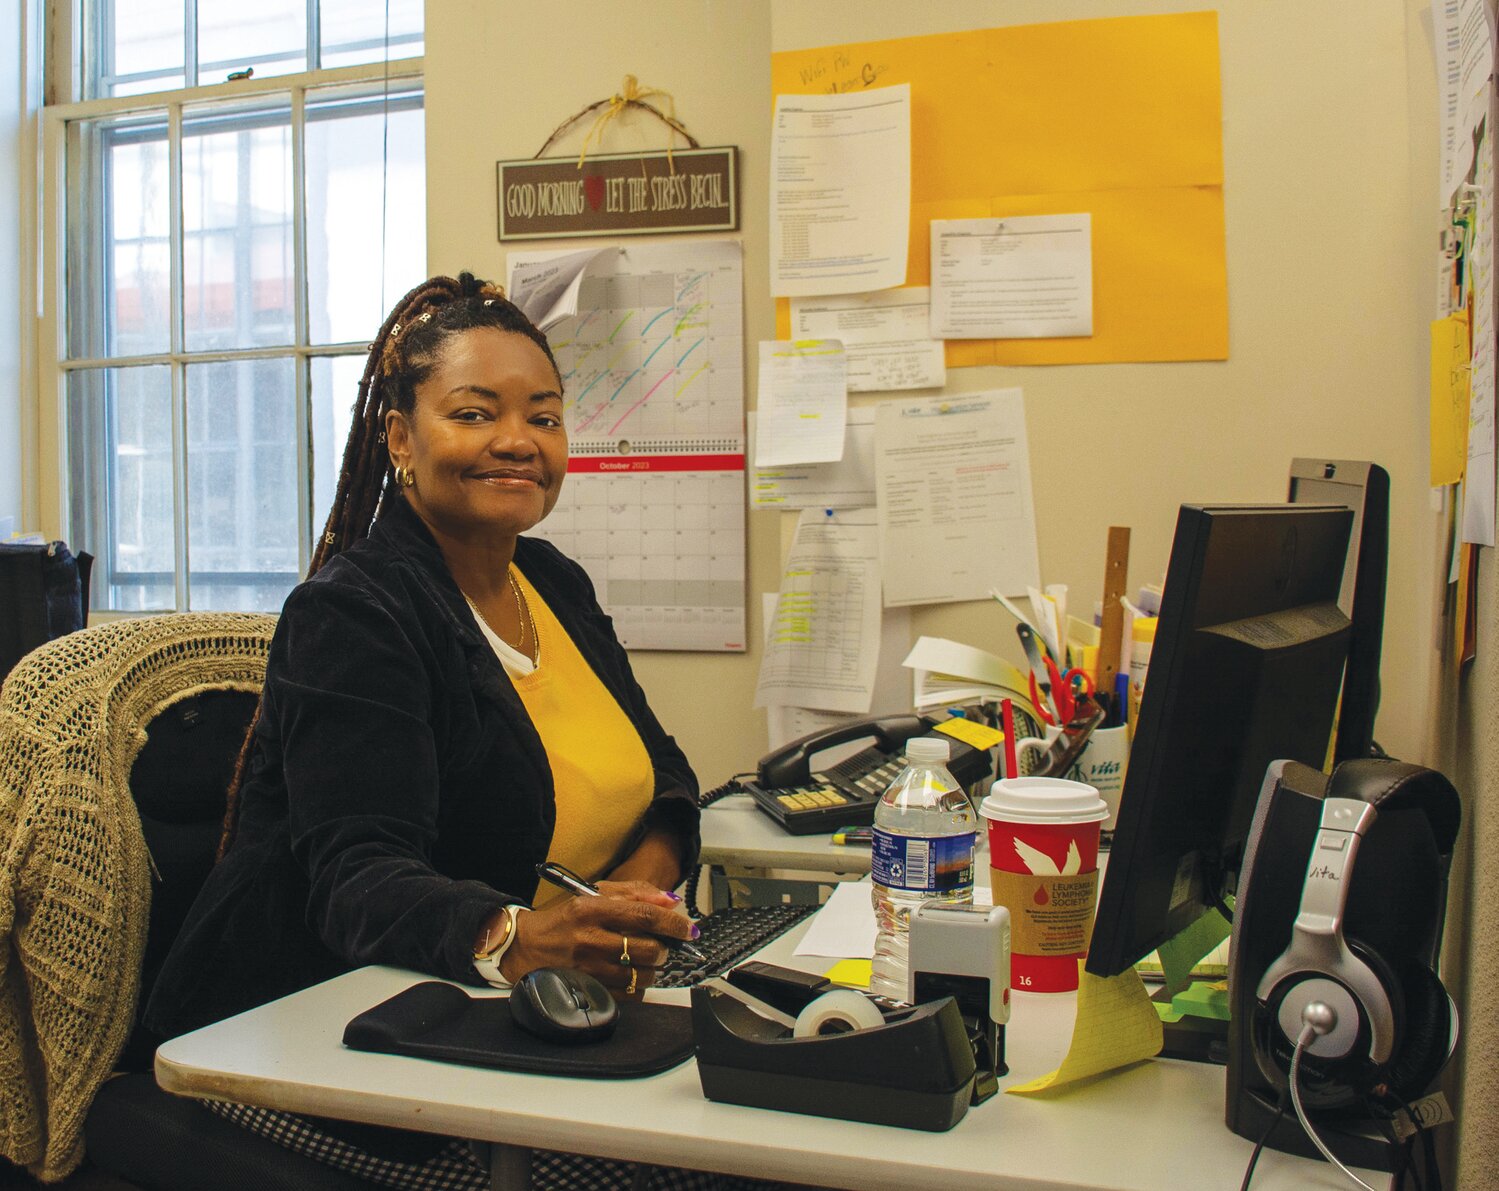 Jacqueline Chapman, Executive Administrative Assistant, helps keep Vita Education Services’ activities running smoothly.